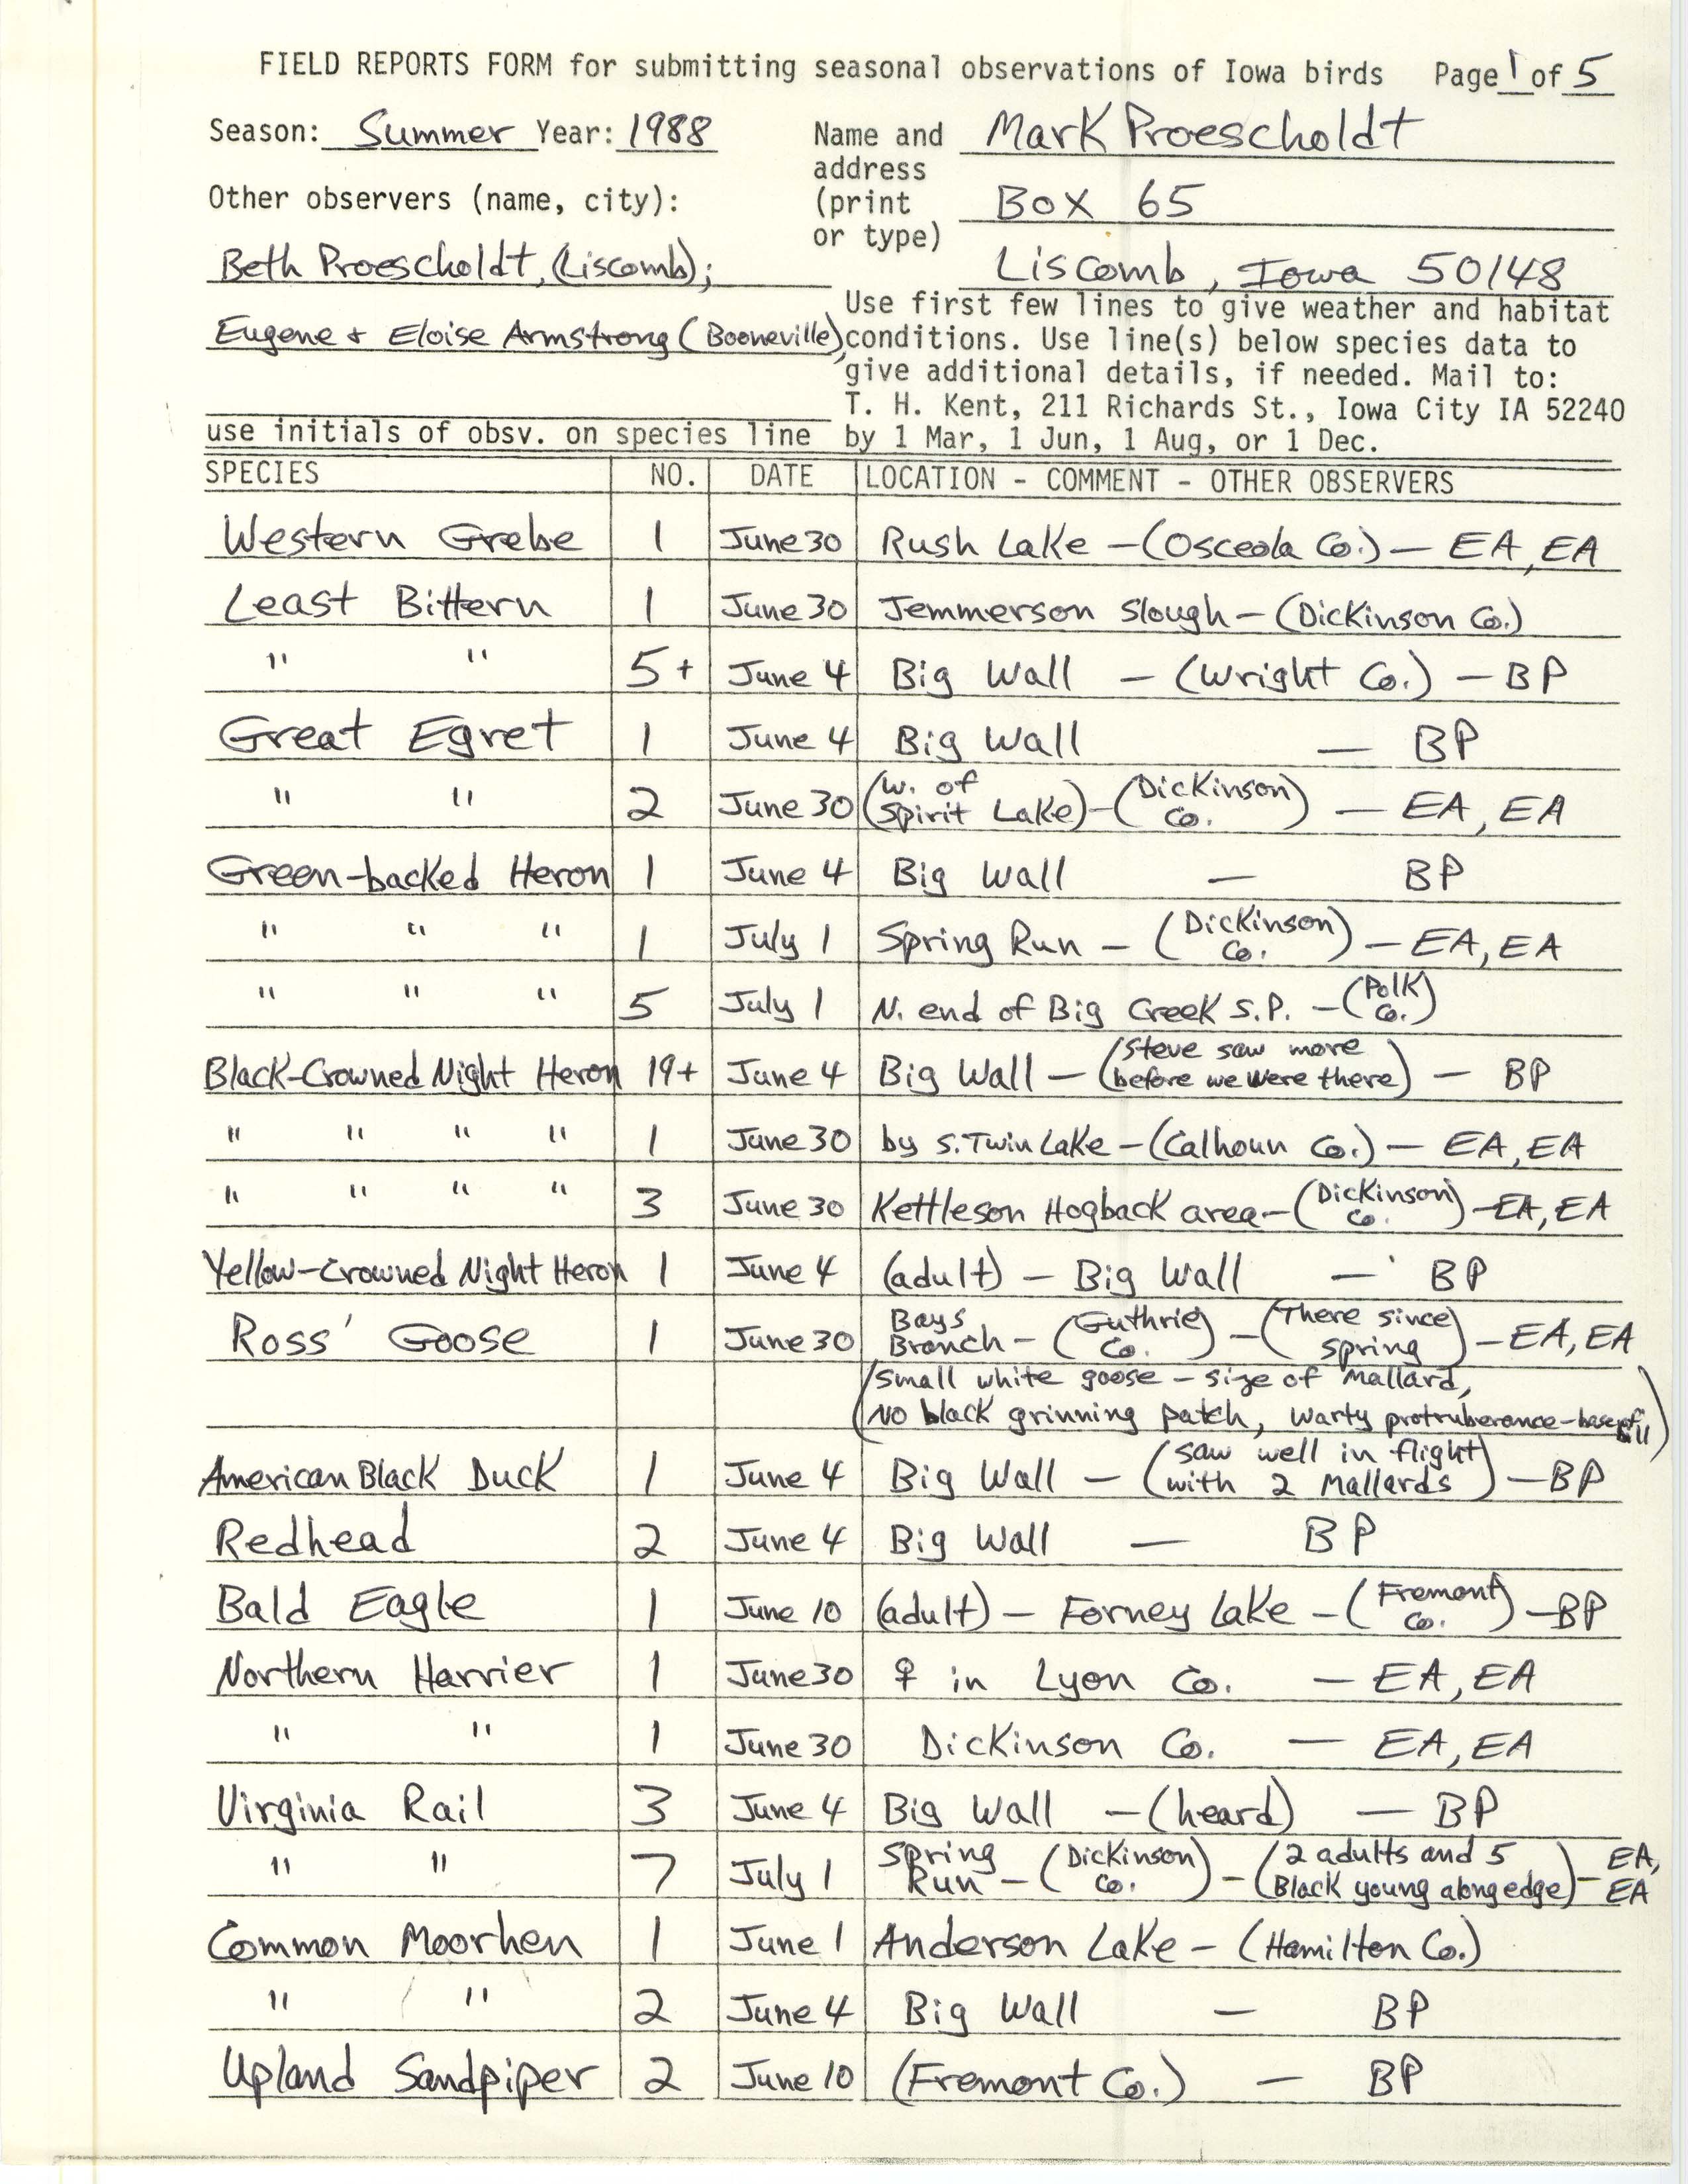 Field reports form for submitting seasonal observations of Iowa birds, Mark Proescholdt, summer 1988